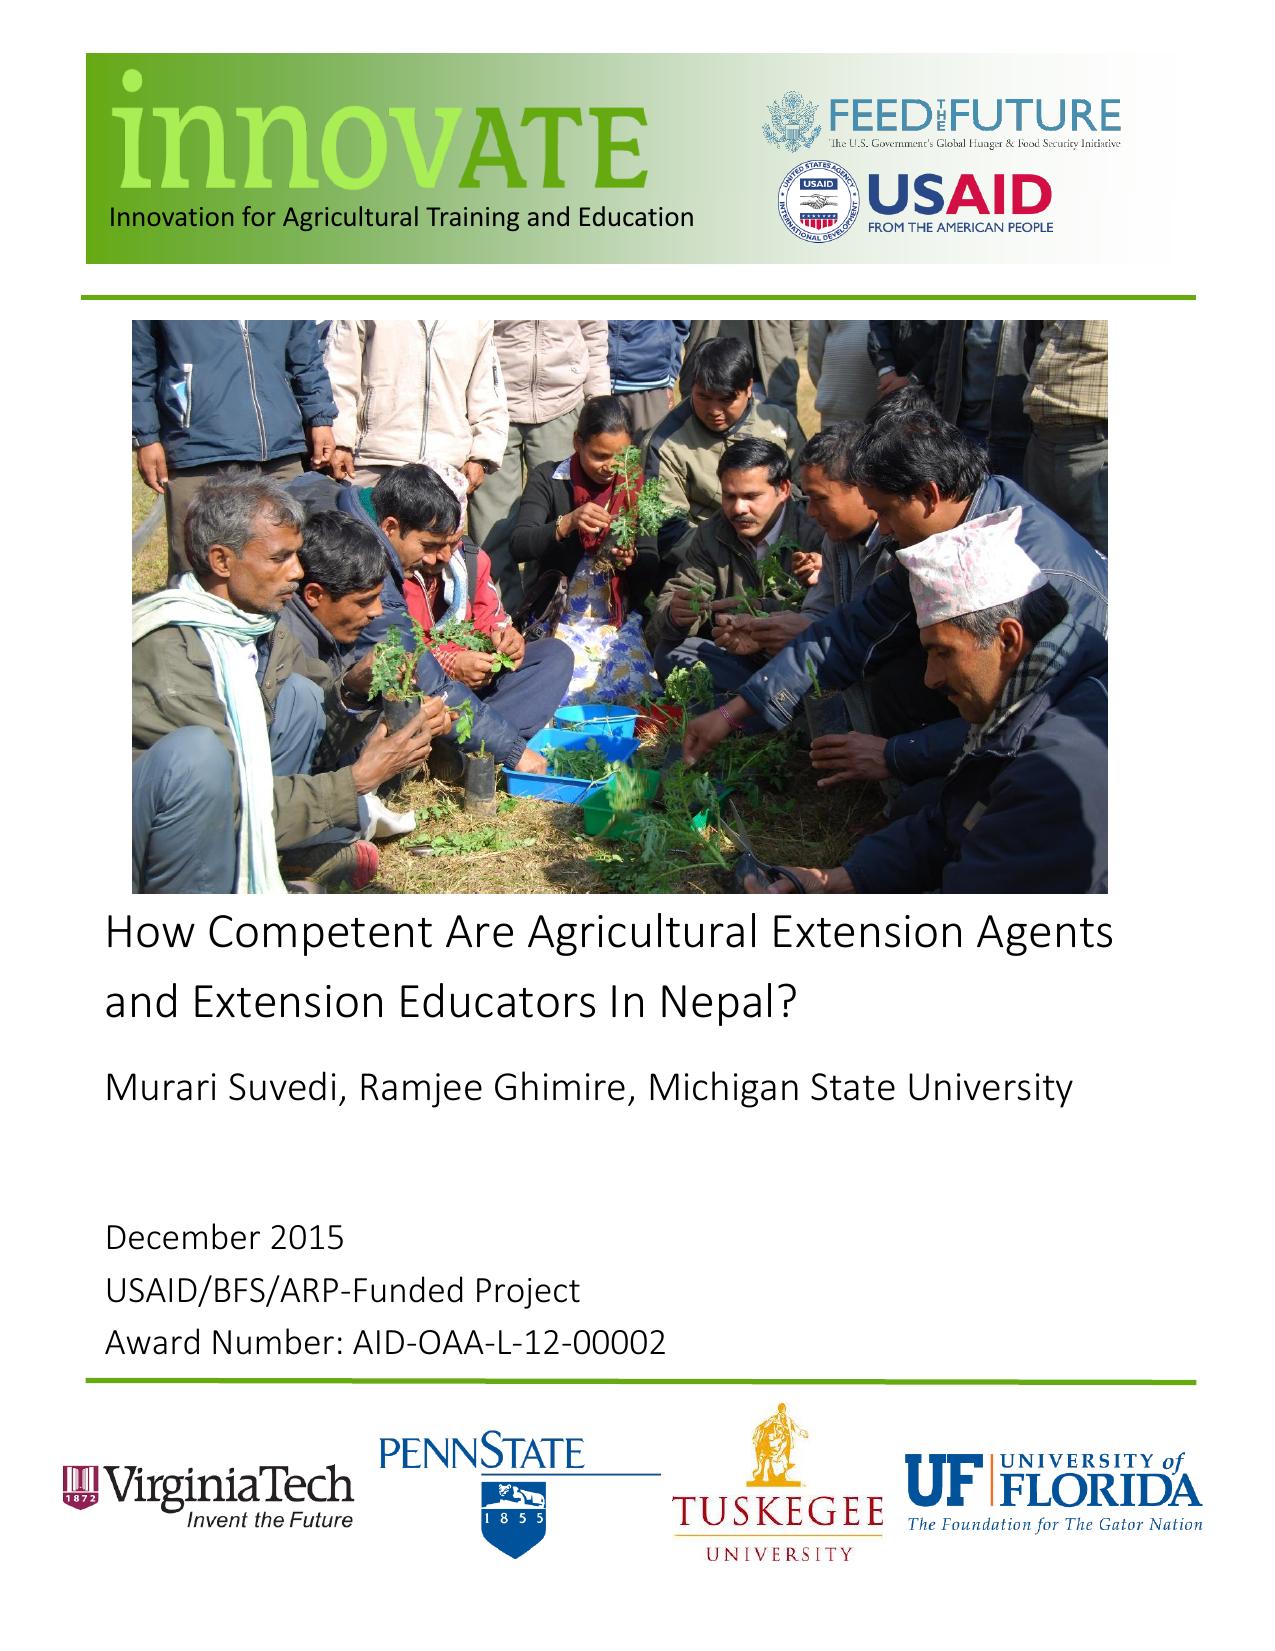 How Competent Are Agricultural Extension Agents and Extension Educators In Nepal 2015